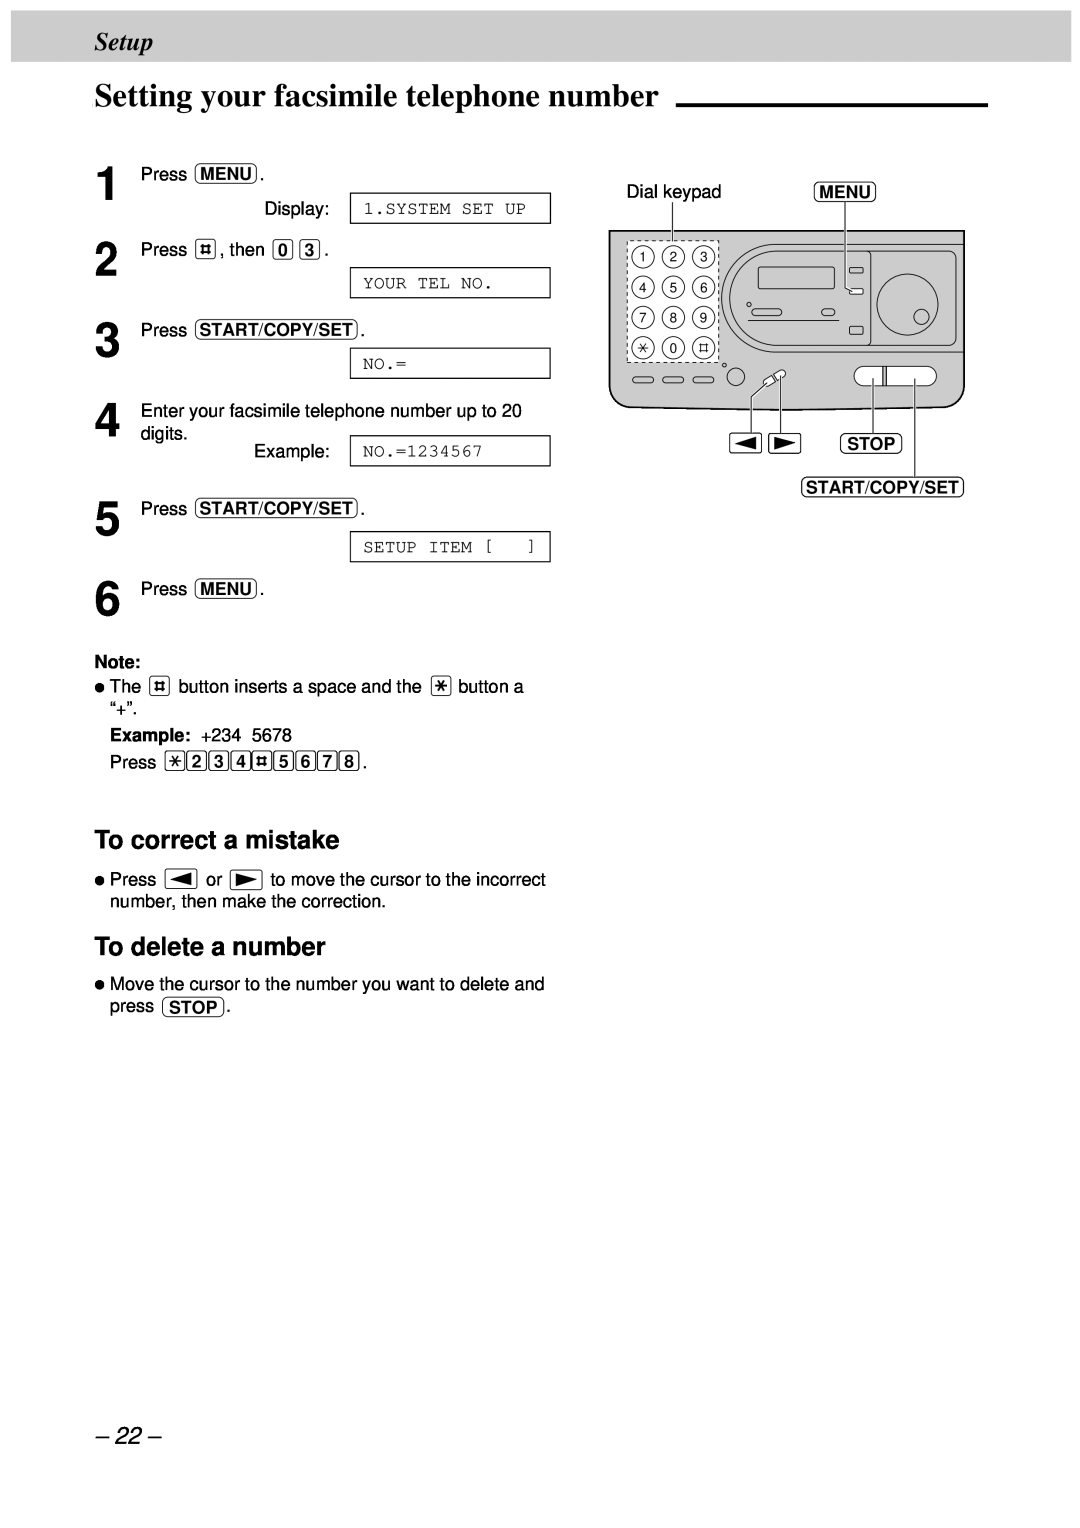 Panasonic KX-FT33HK, KX-FT34HK Setting your facsimile telephone number, To delete a number, Setup, To correct a mistake 